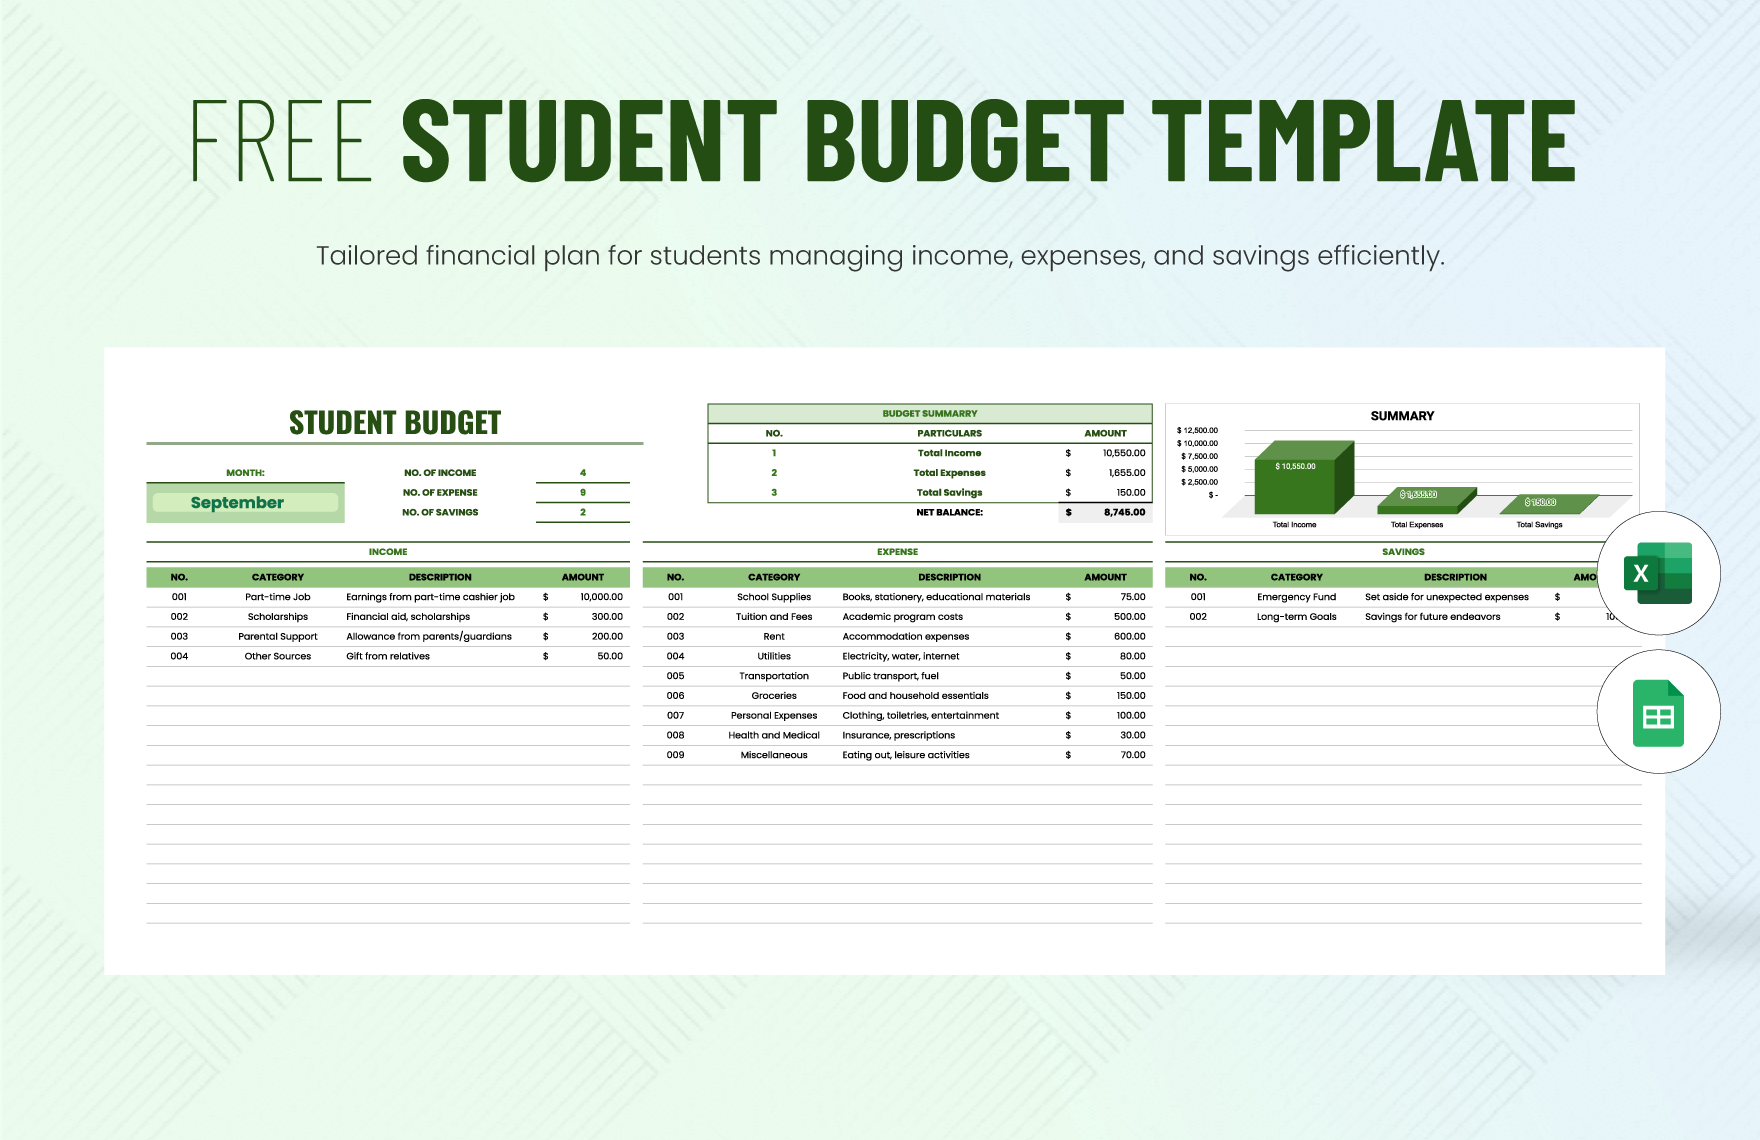 Free Student Budget Template in Excel, Google Sheets